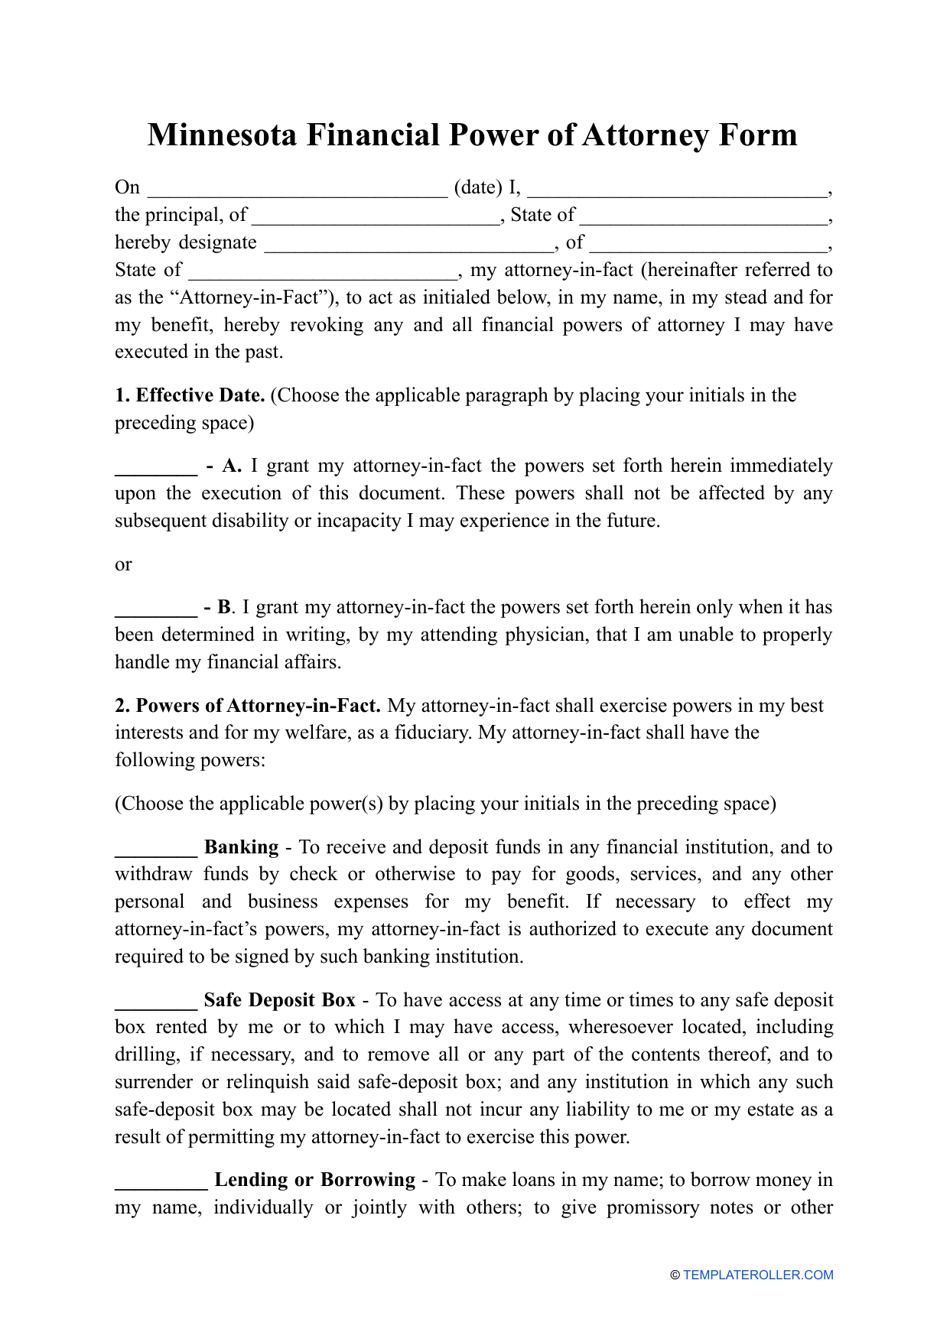 Financial Power of Attorney Form - Minnesota, Page 1